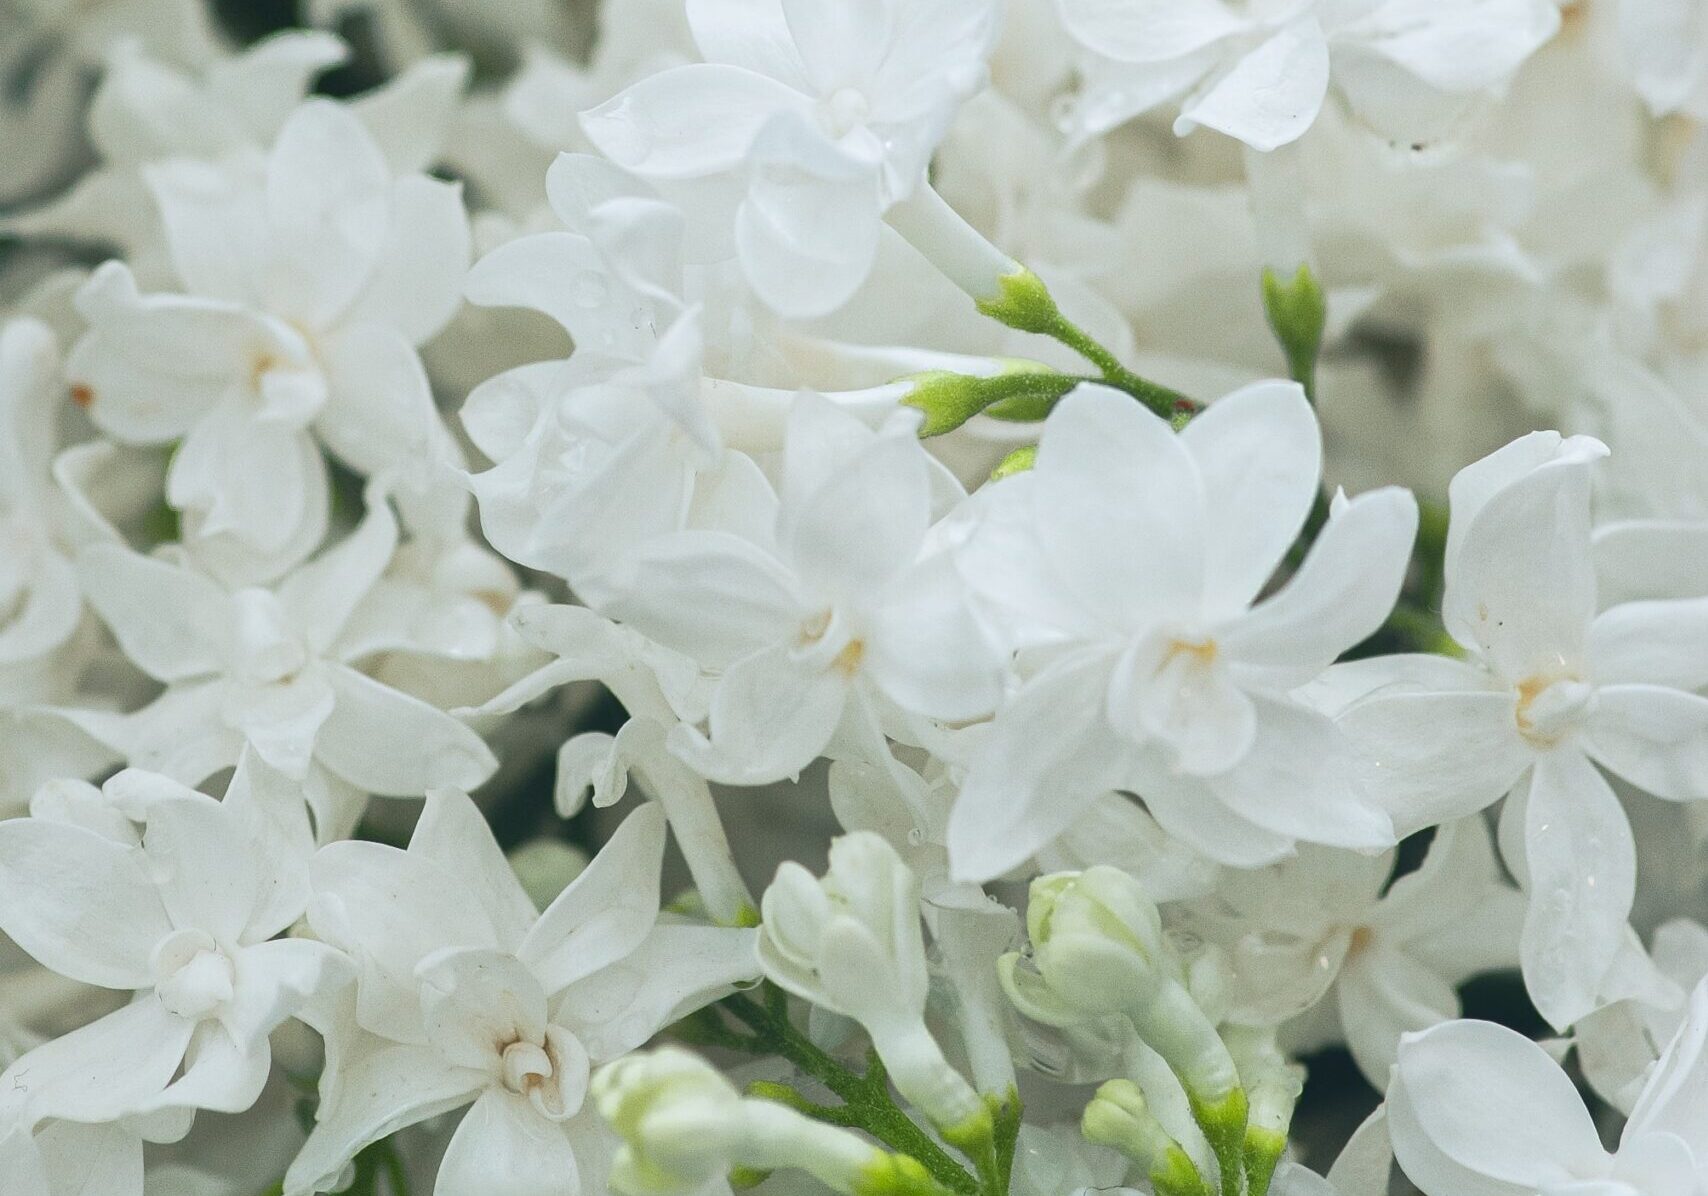 Hero image on Sympathy Flowers Page, also the image which indicates link to Sympathy Flowers page, depicts white flowers